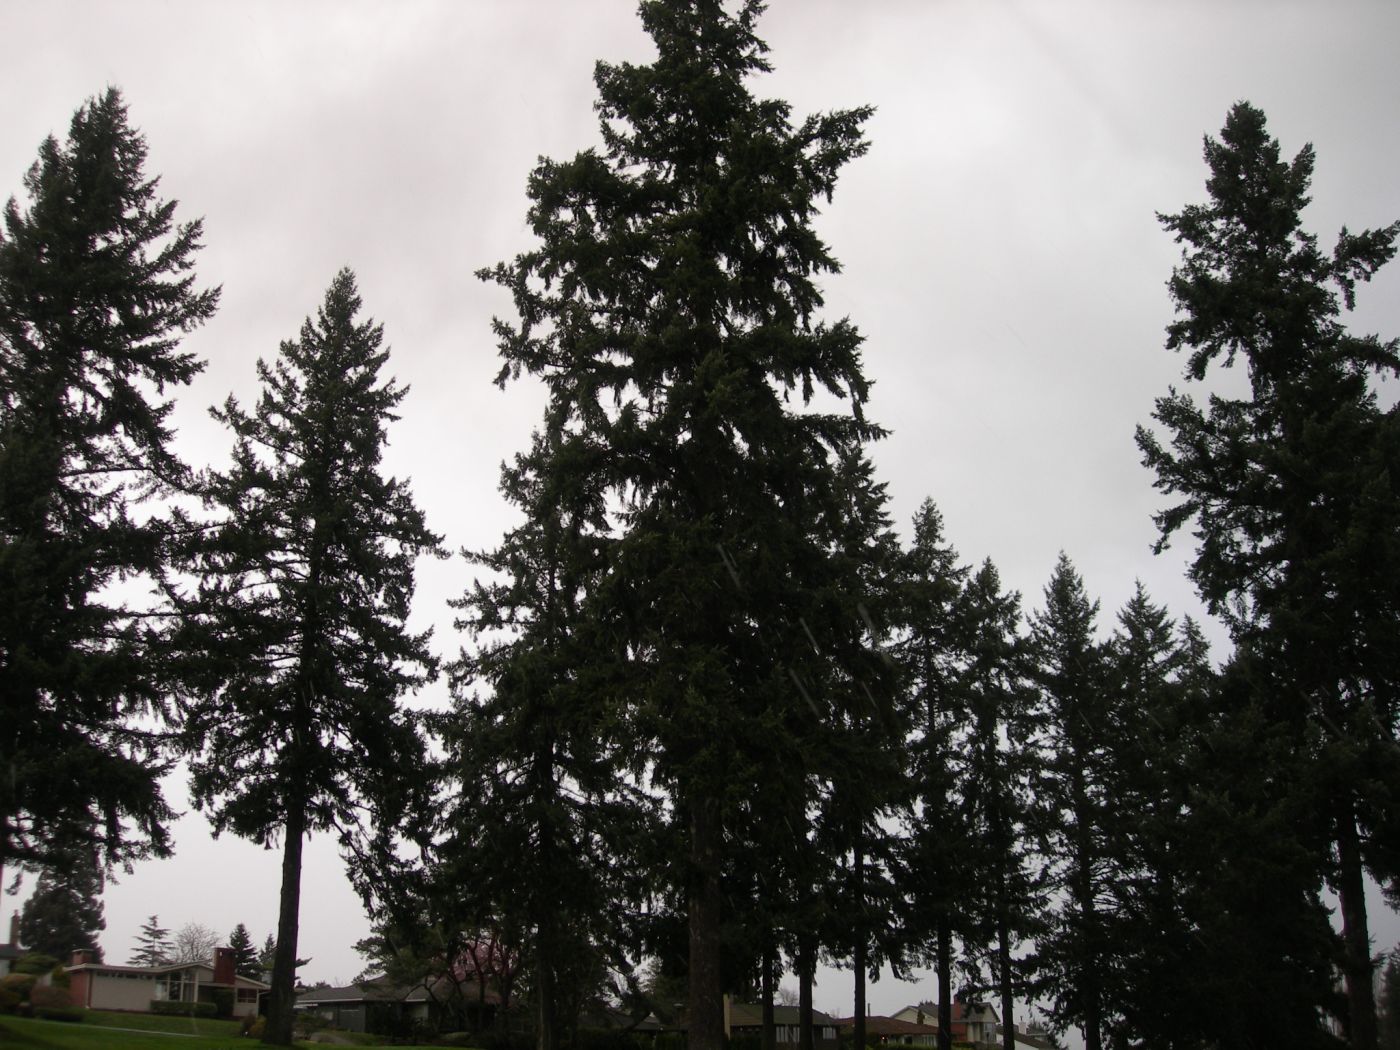 Coast Douglas-fir is the Third Tallest Tree and Second Tallest Conifer